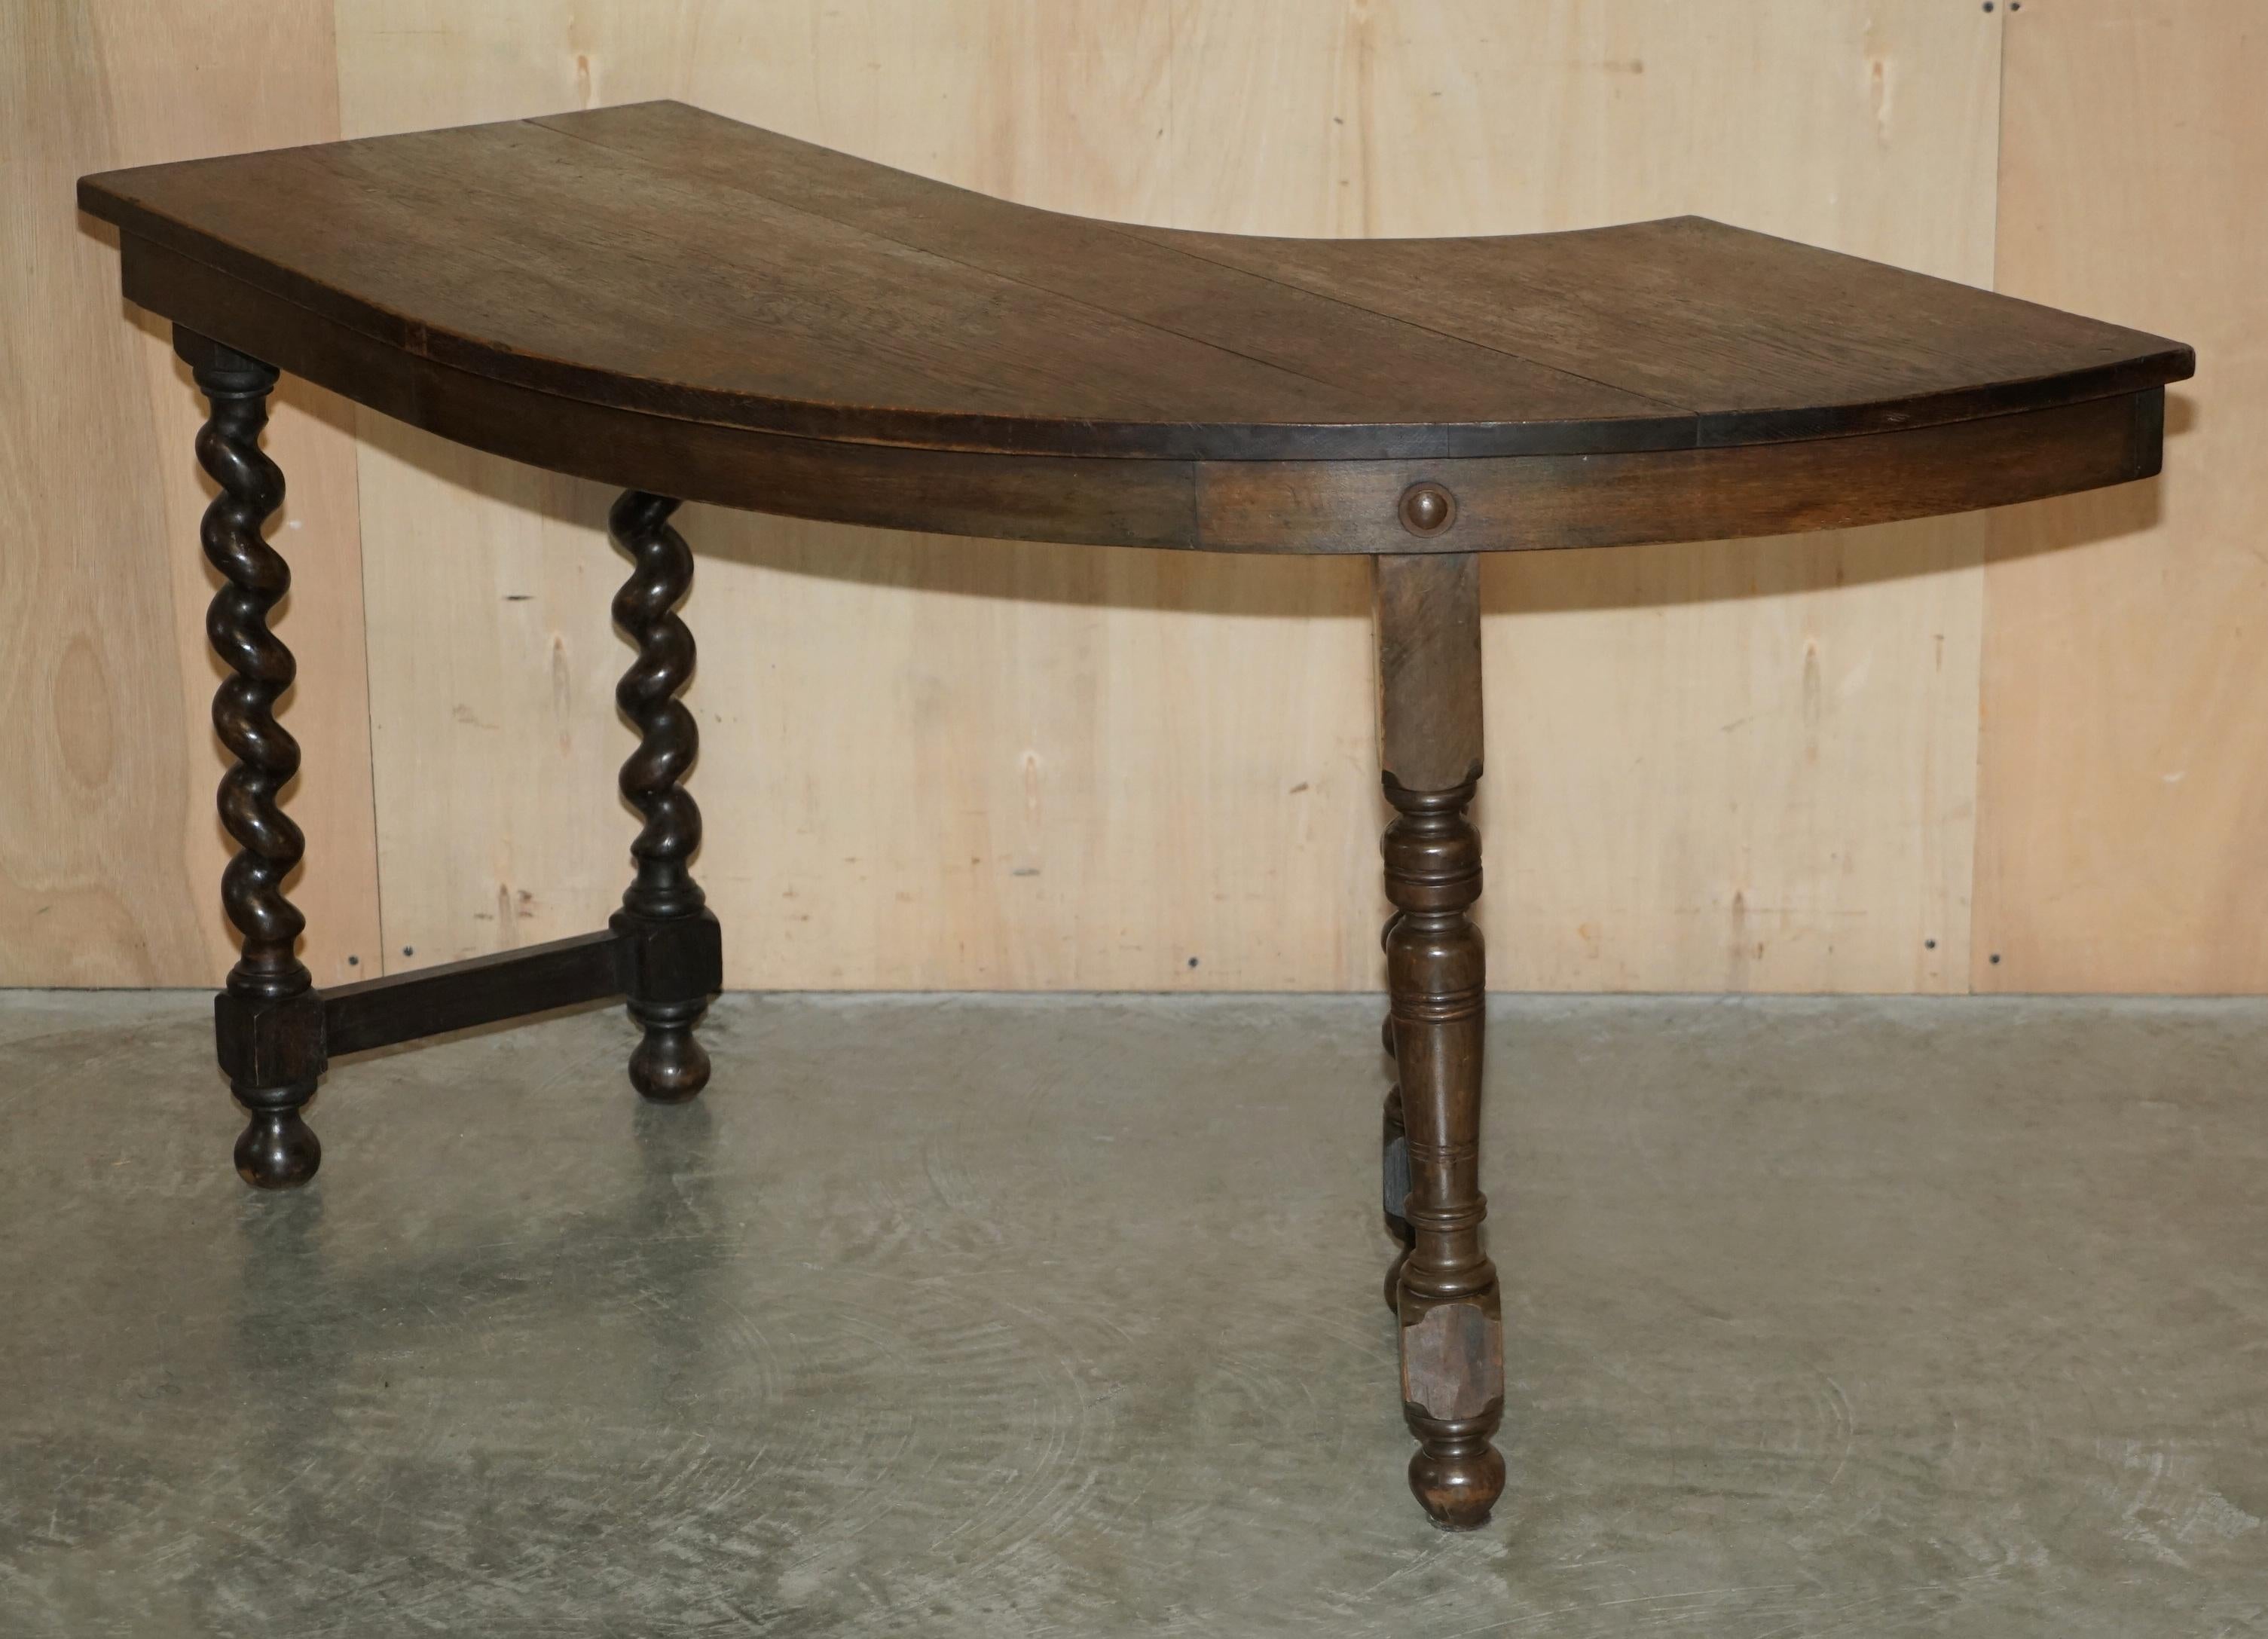 RARE & COLLECTABLE ANTIQUE JACOBEAN REVIVAL BARLEY TWiST LEG ENGLISH HUNT TABLE For Sale 9